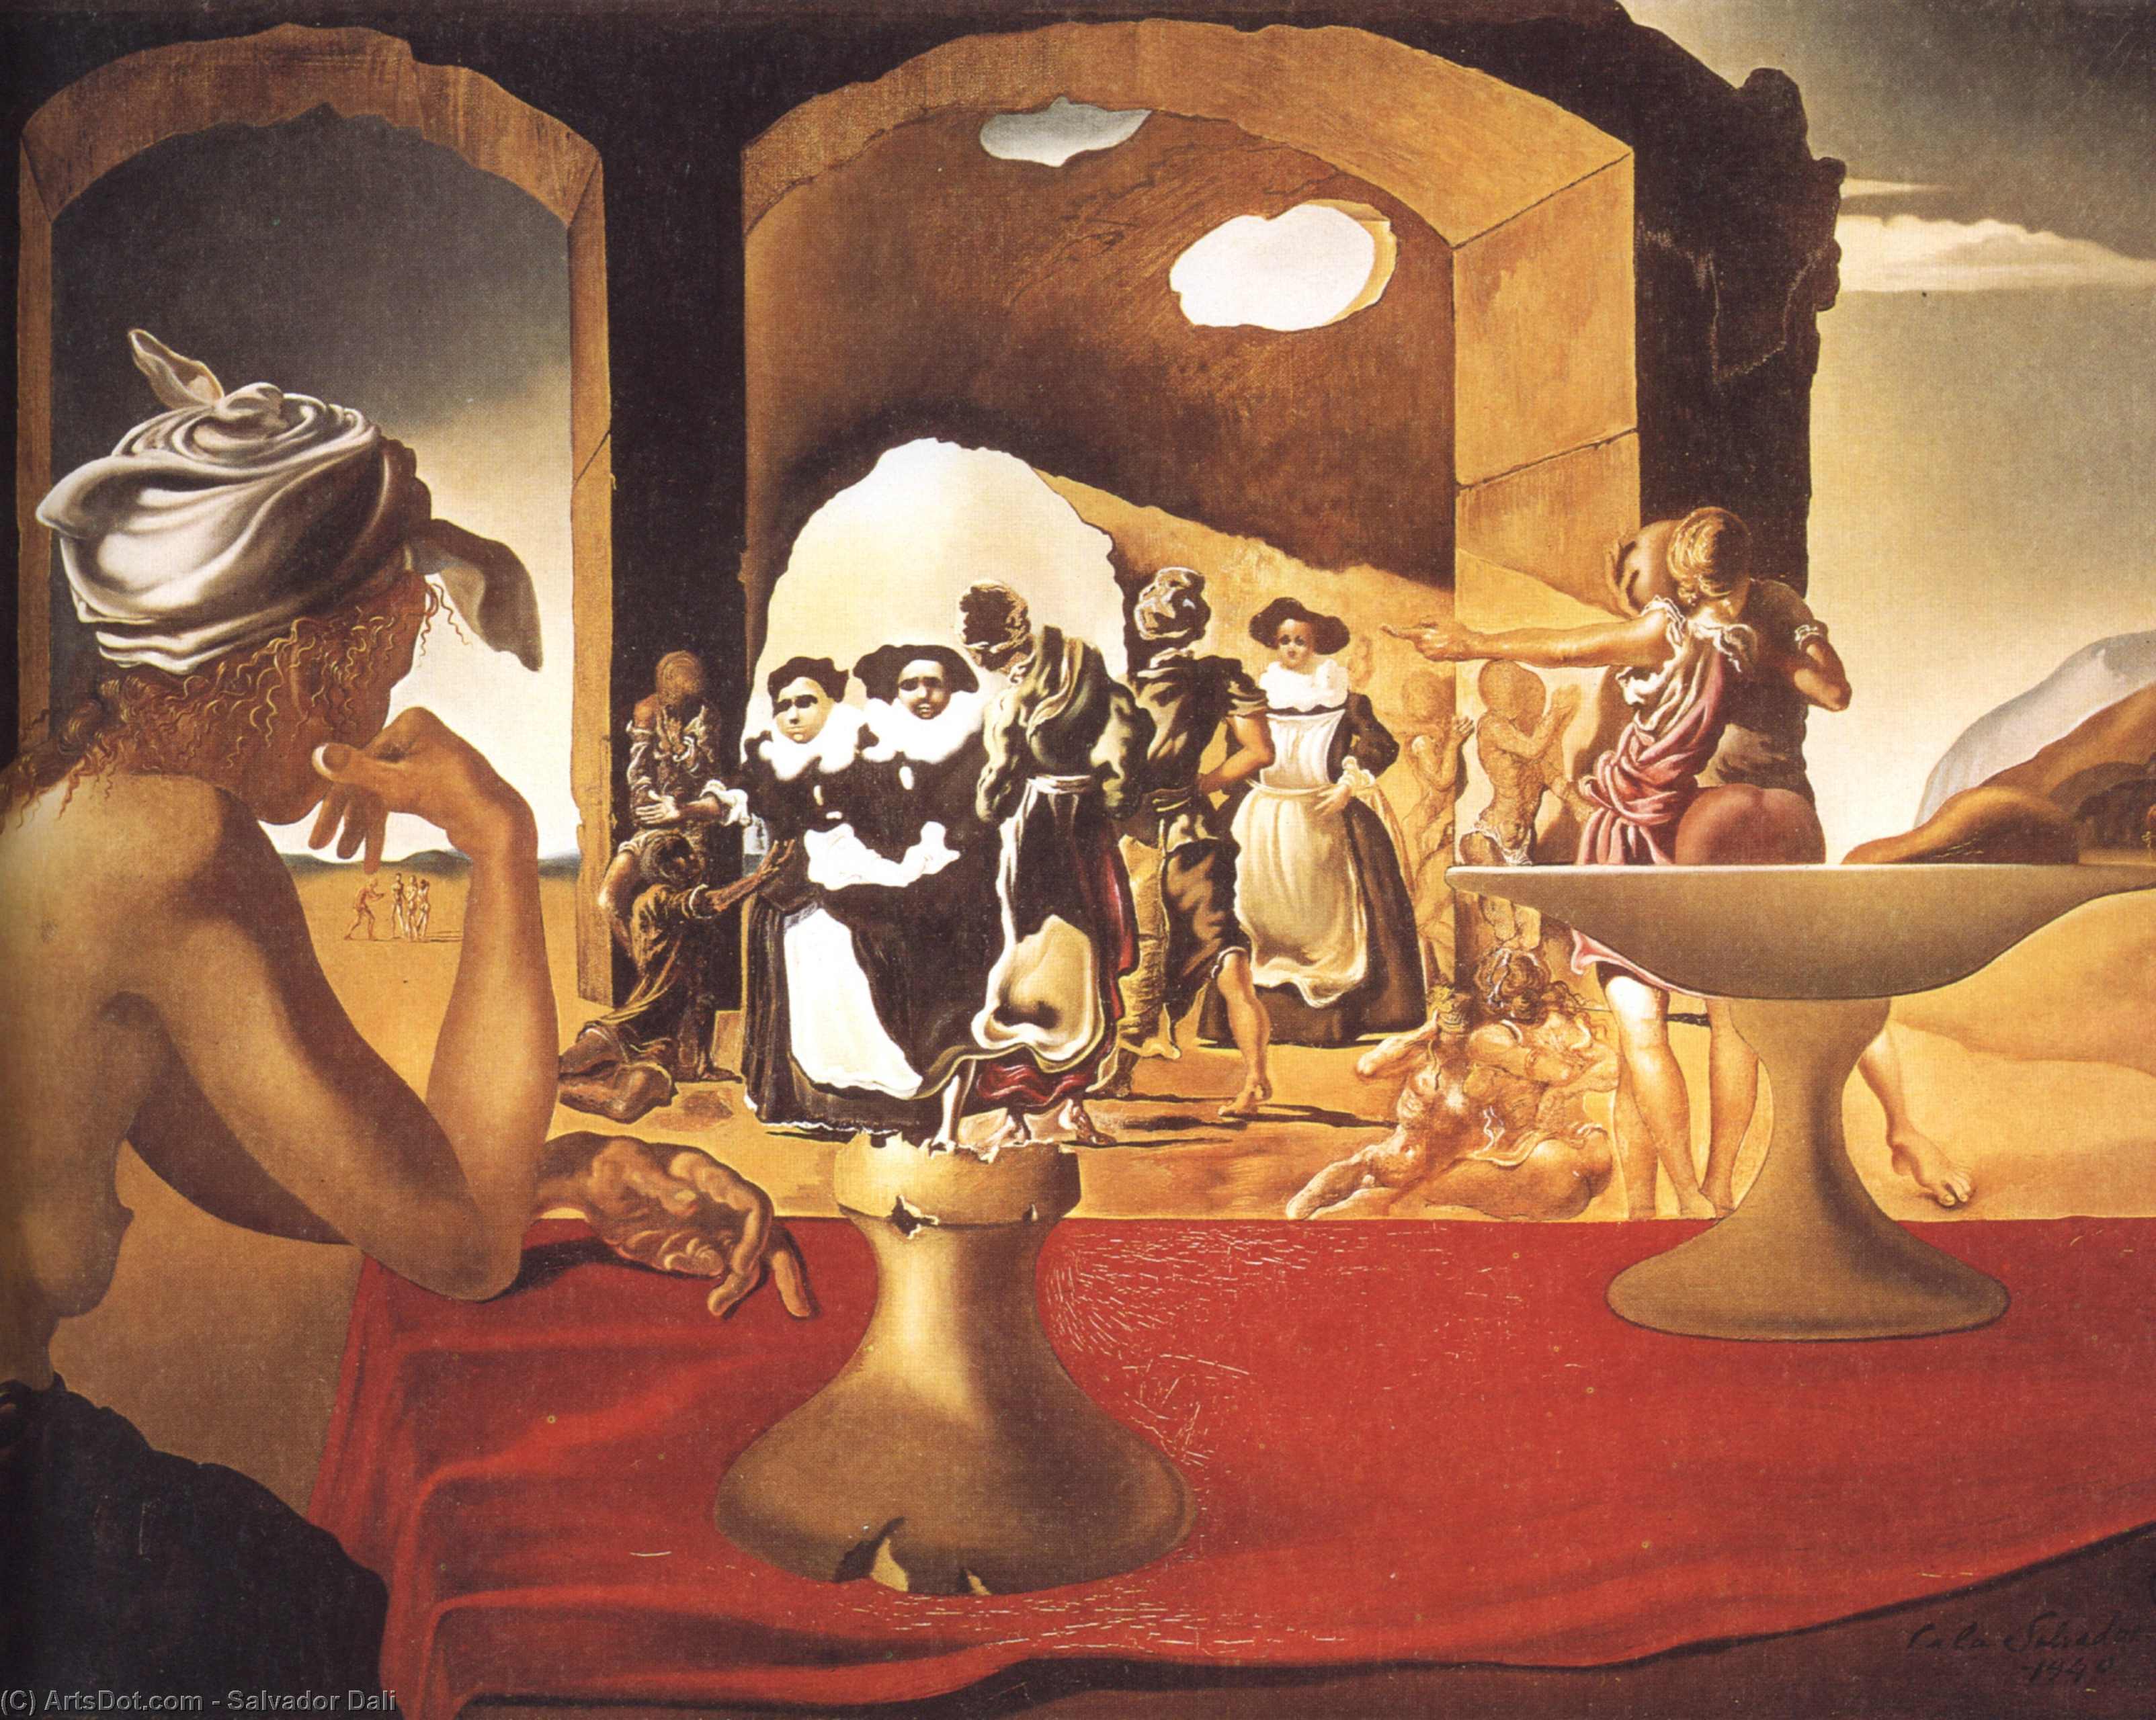 WikiOO.org - دایره المعارف هنرهای زیبا - نقاشی، آثار هنری Salvador Dali - Slave Market with the Disappearing Bust of Voltaire, 1940